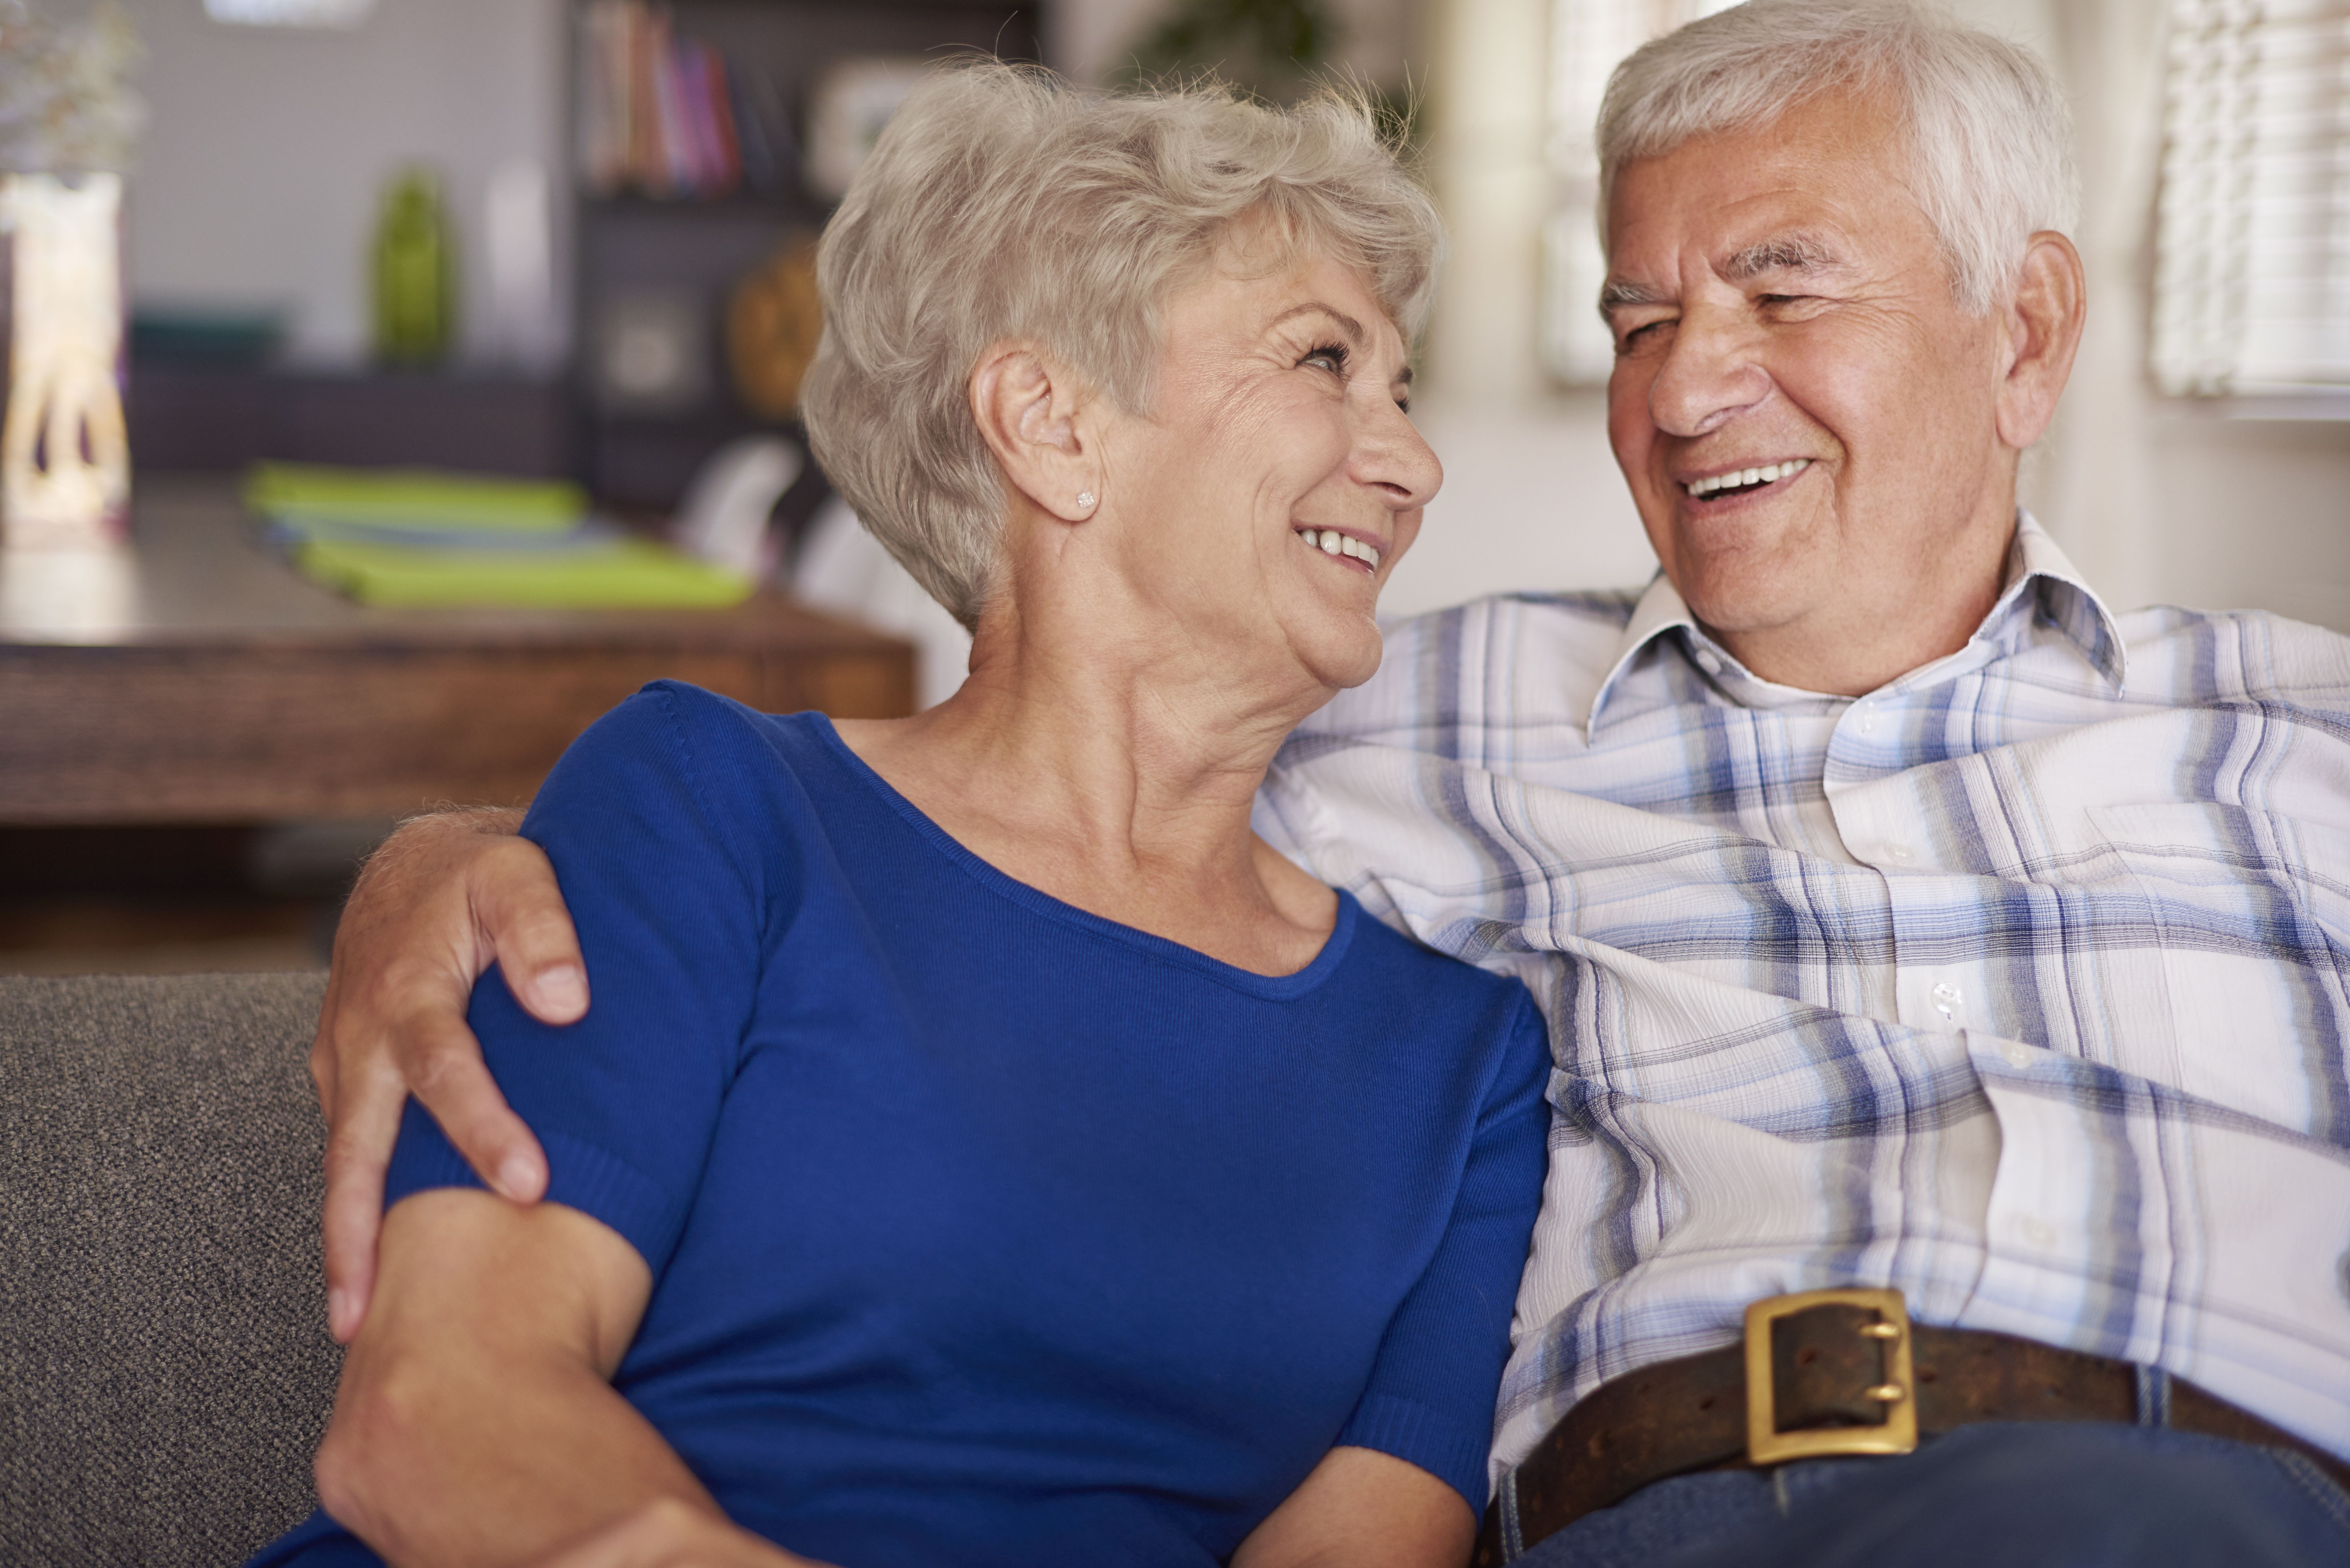 An elderly couple looking at each other while smiling. | Source: Shutterstock